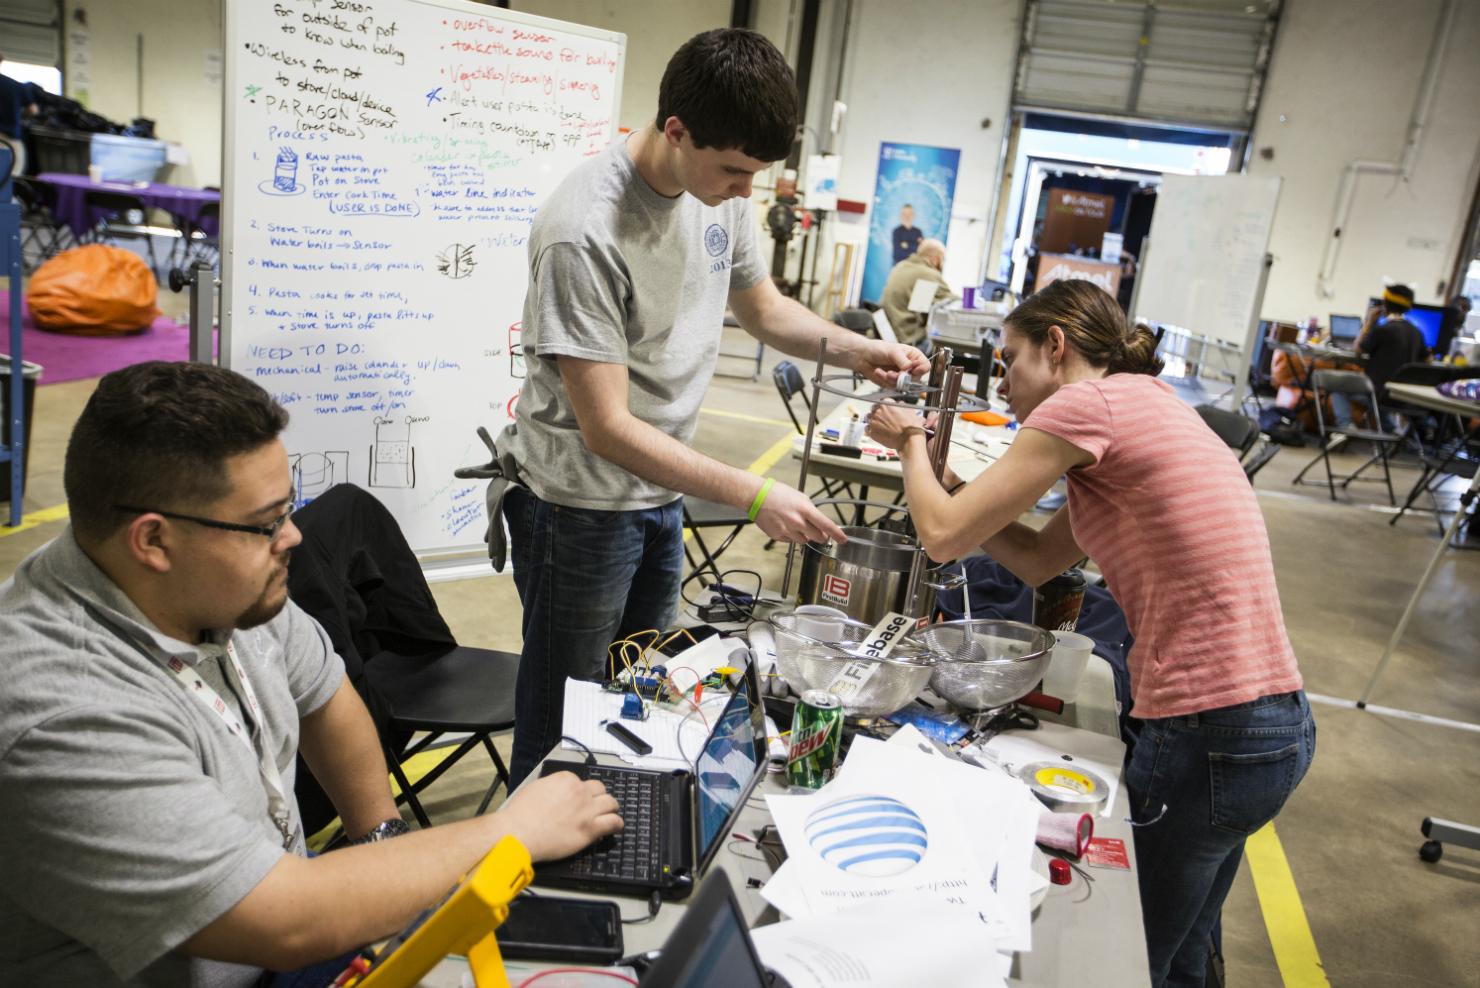 cool projects from the ge firstbuild hack home event hackathon